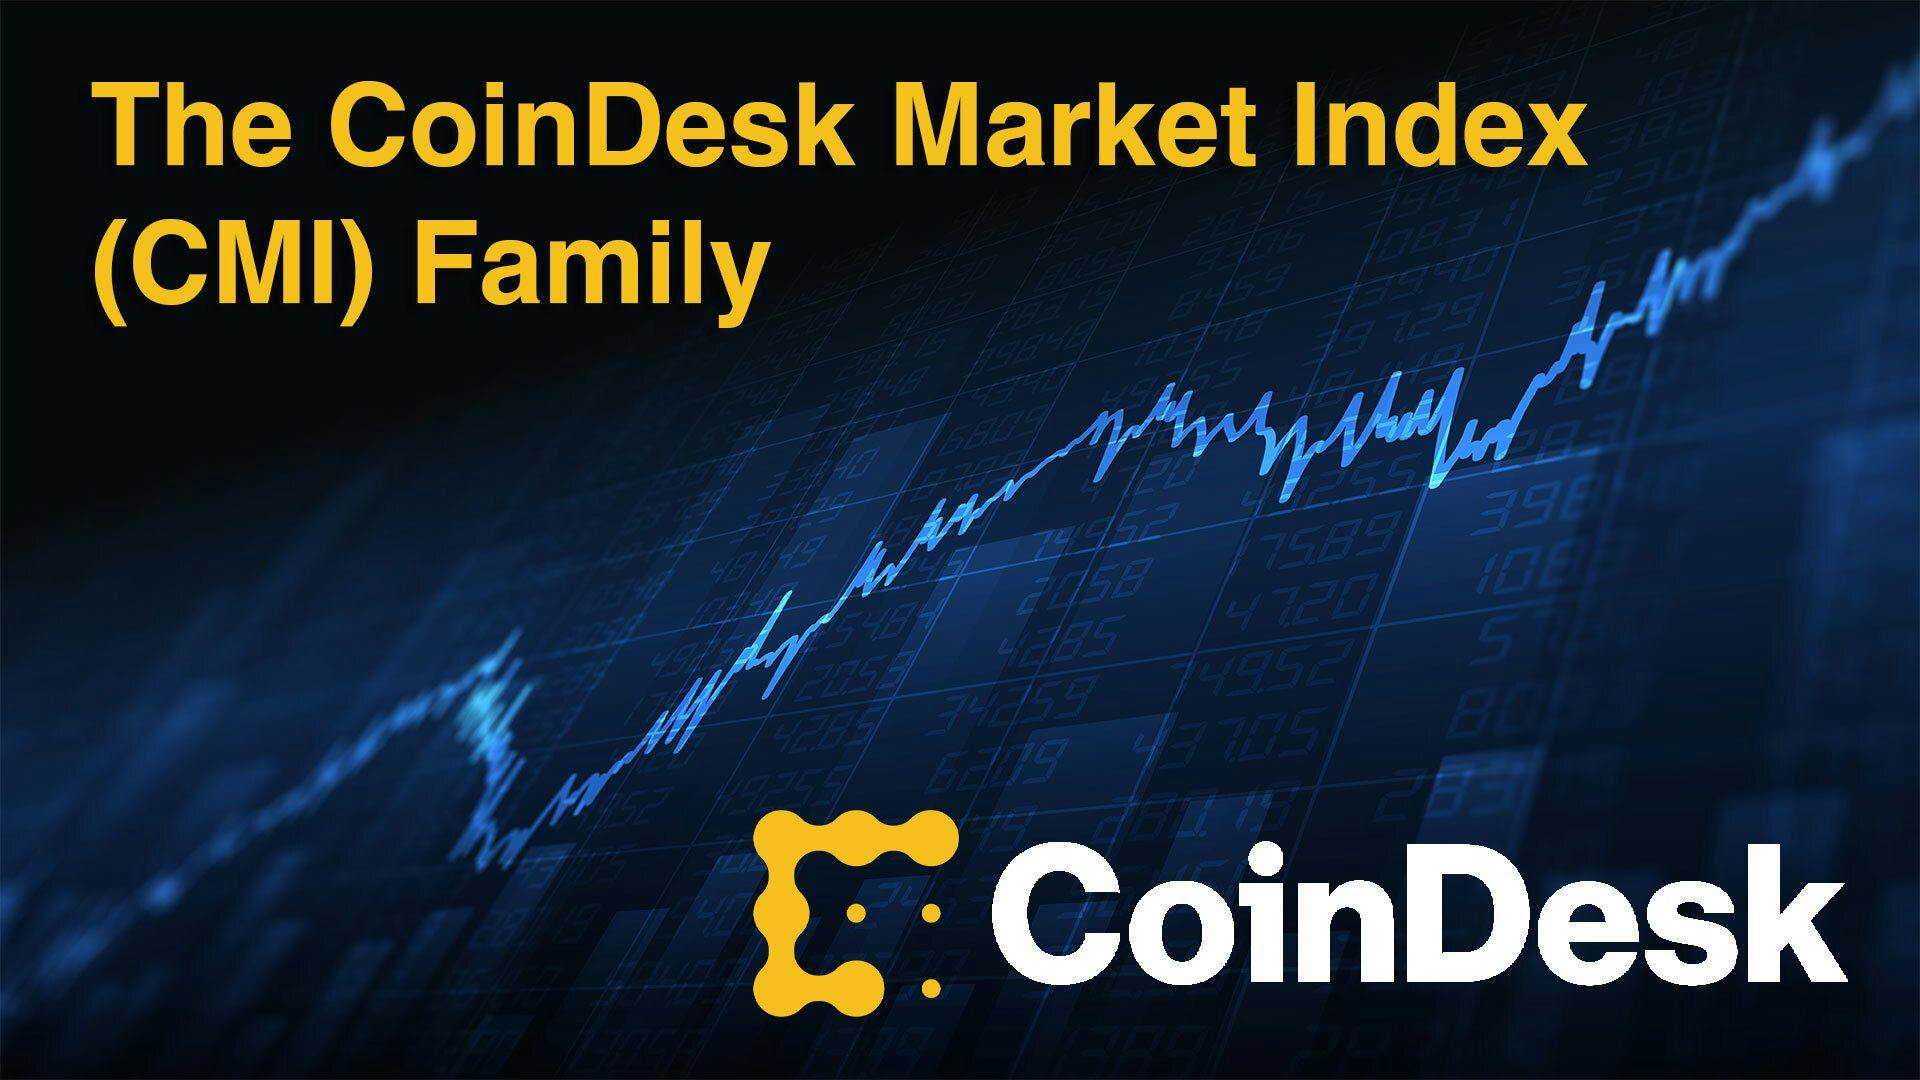 The CoinDesk Market Index (CMI) Family Brochure's image